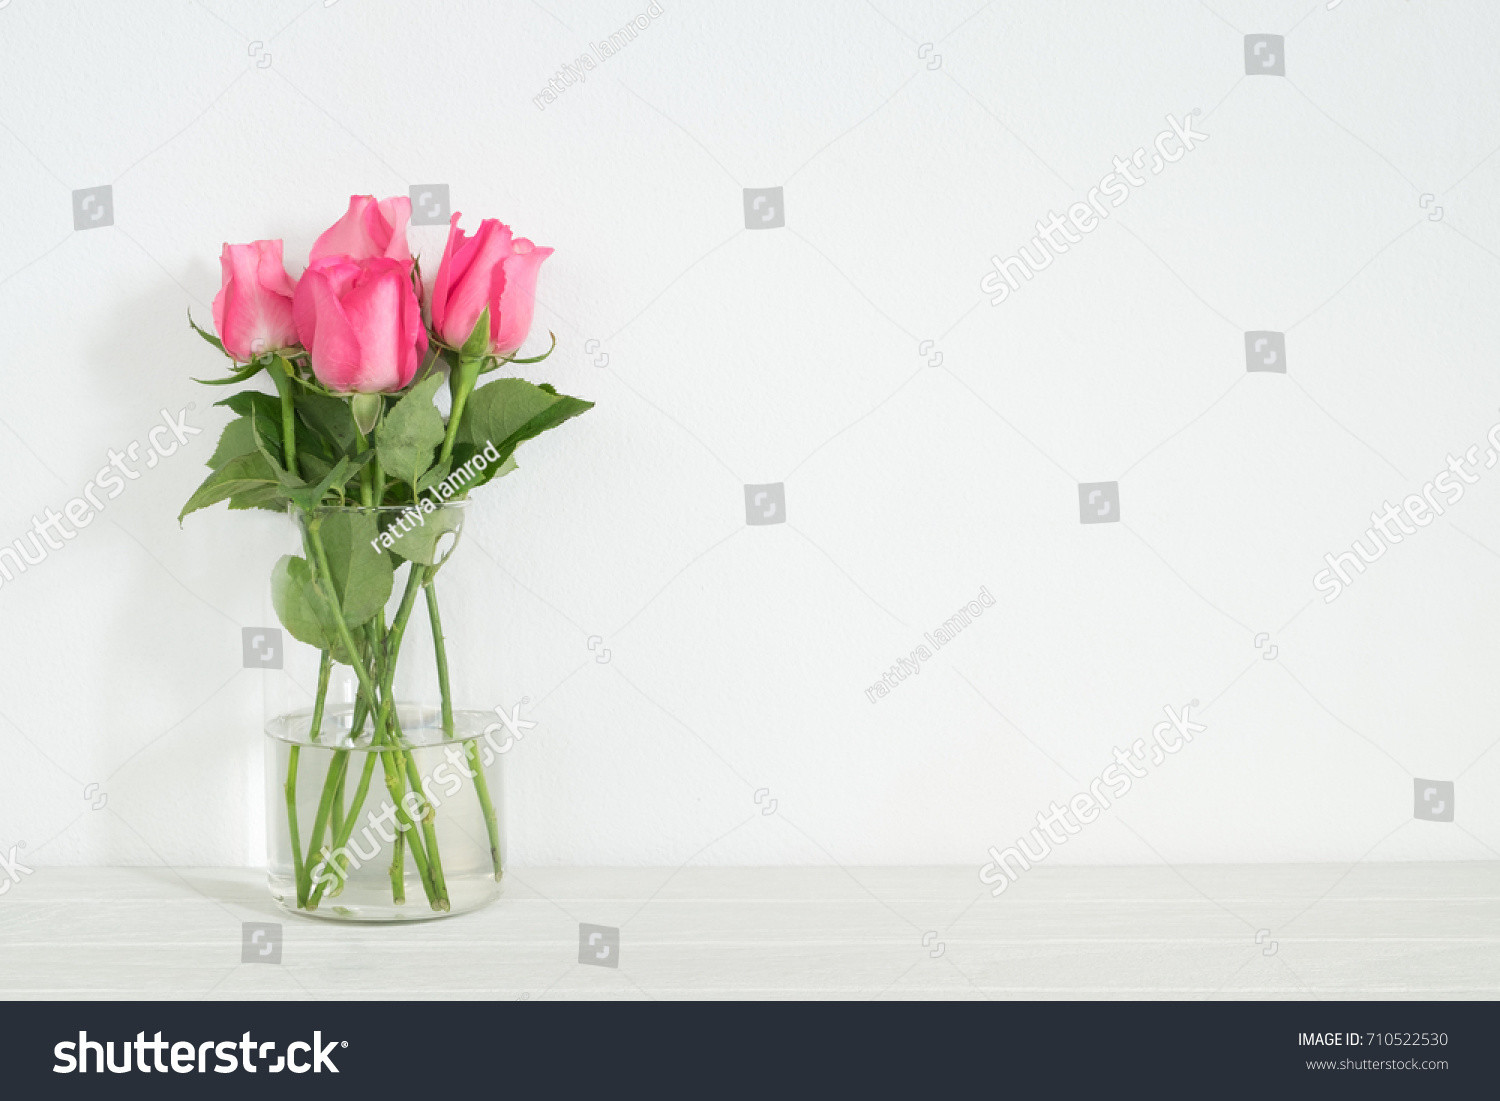 15 Stylish White Tulips In Glass Vase 2024 free download white tulips in glass vase of pink rose vase on table copy stock photo edit now 710522530 within pink rose in vase on table with copy space